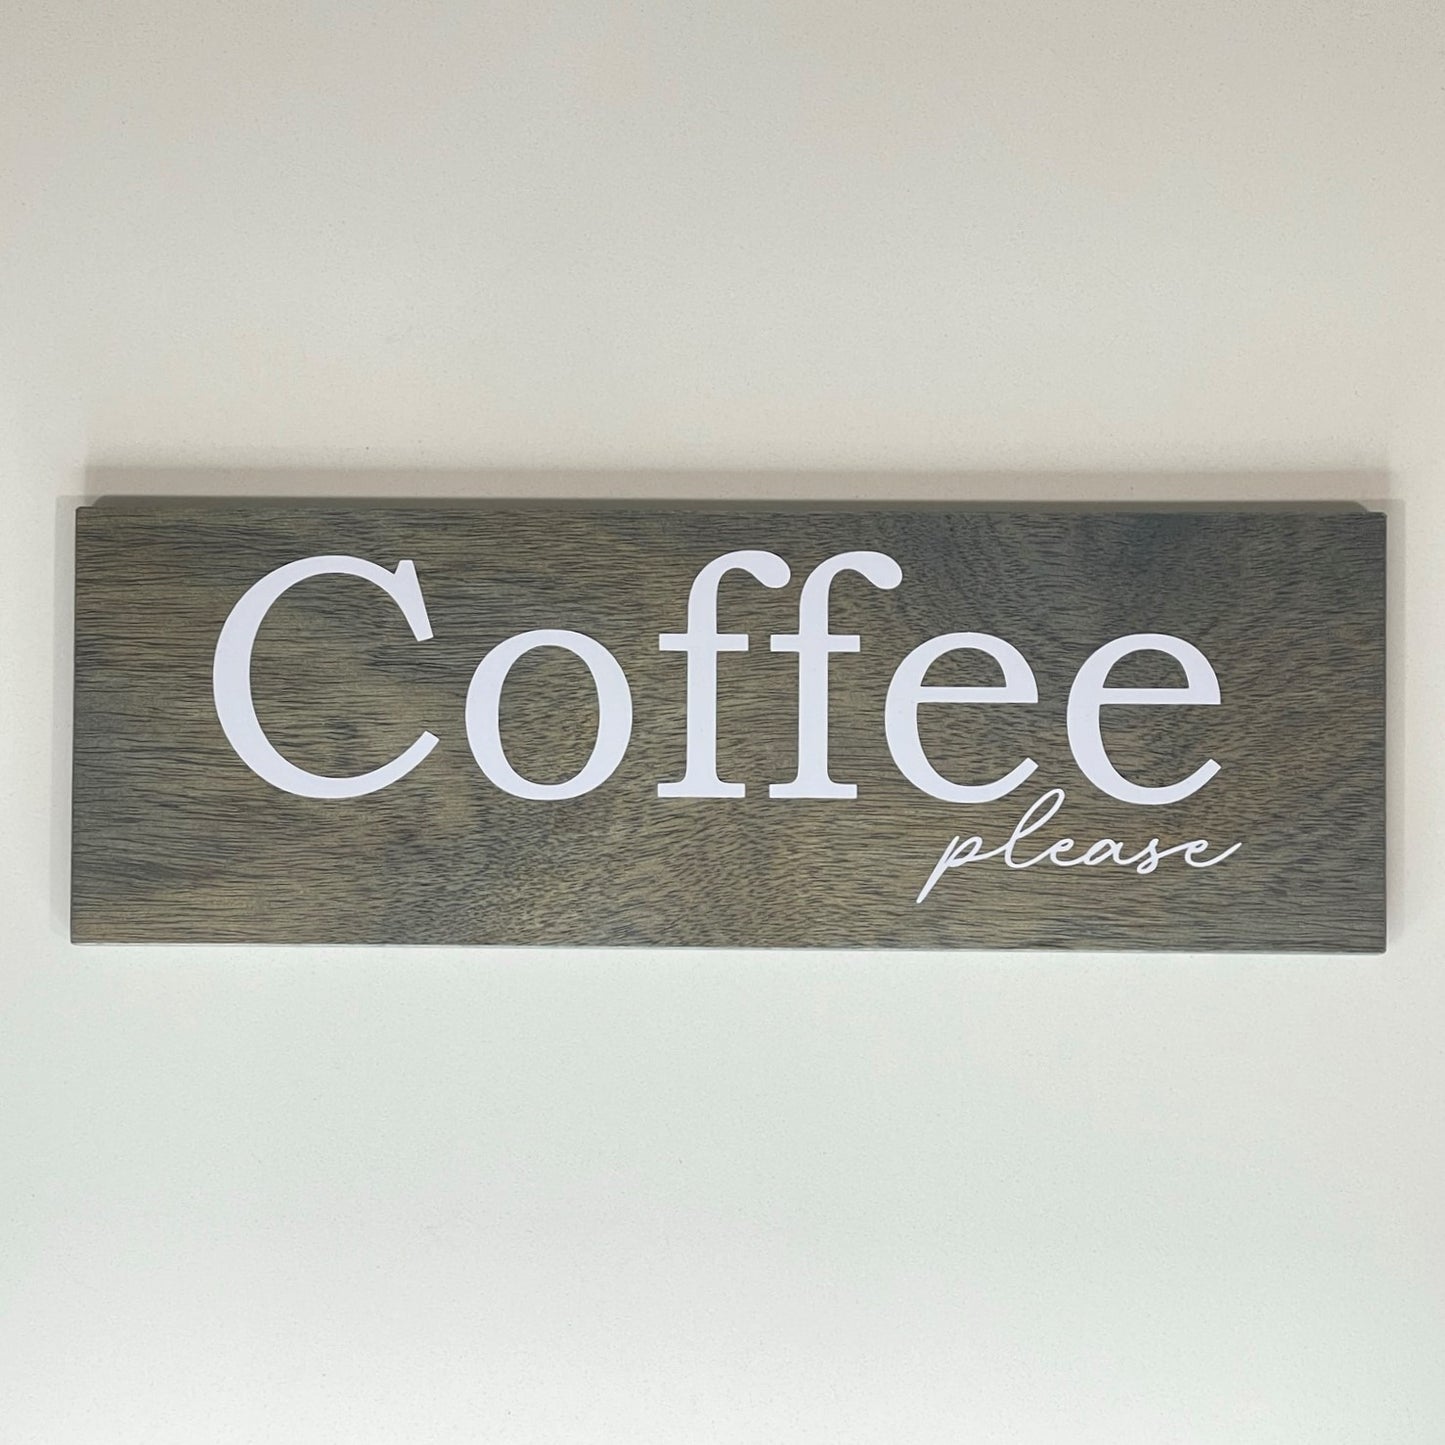 Coffee Please - Funny Sign - Wall Decor - Bar Wall Art - Wooden Sign